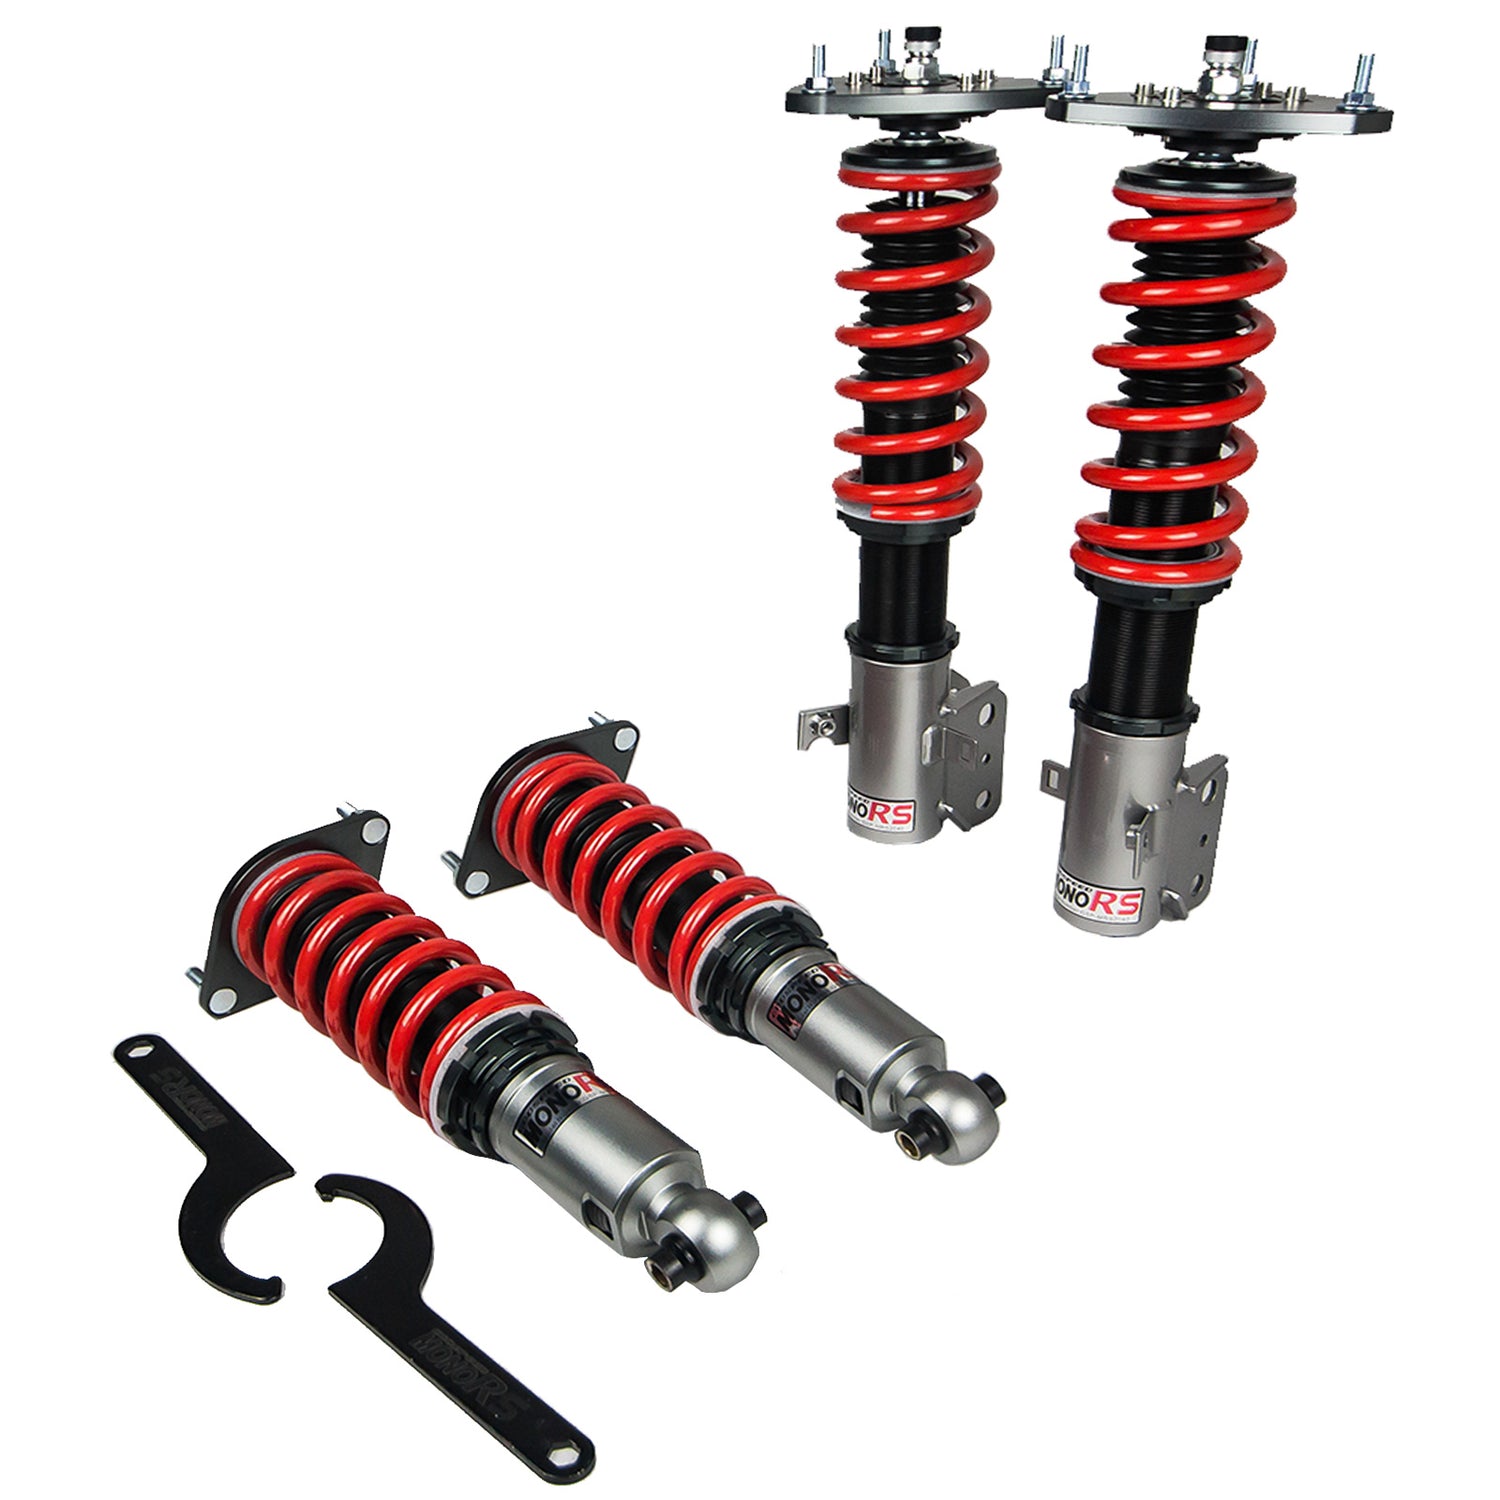 Godspeed(MRS2060) MonoRS Coilovers, Subaru Outback 10-14(BR), Adjustable, Set of 4